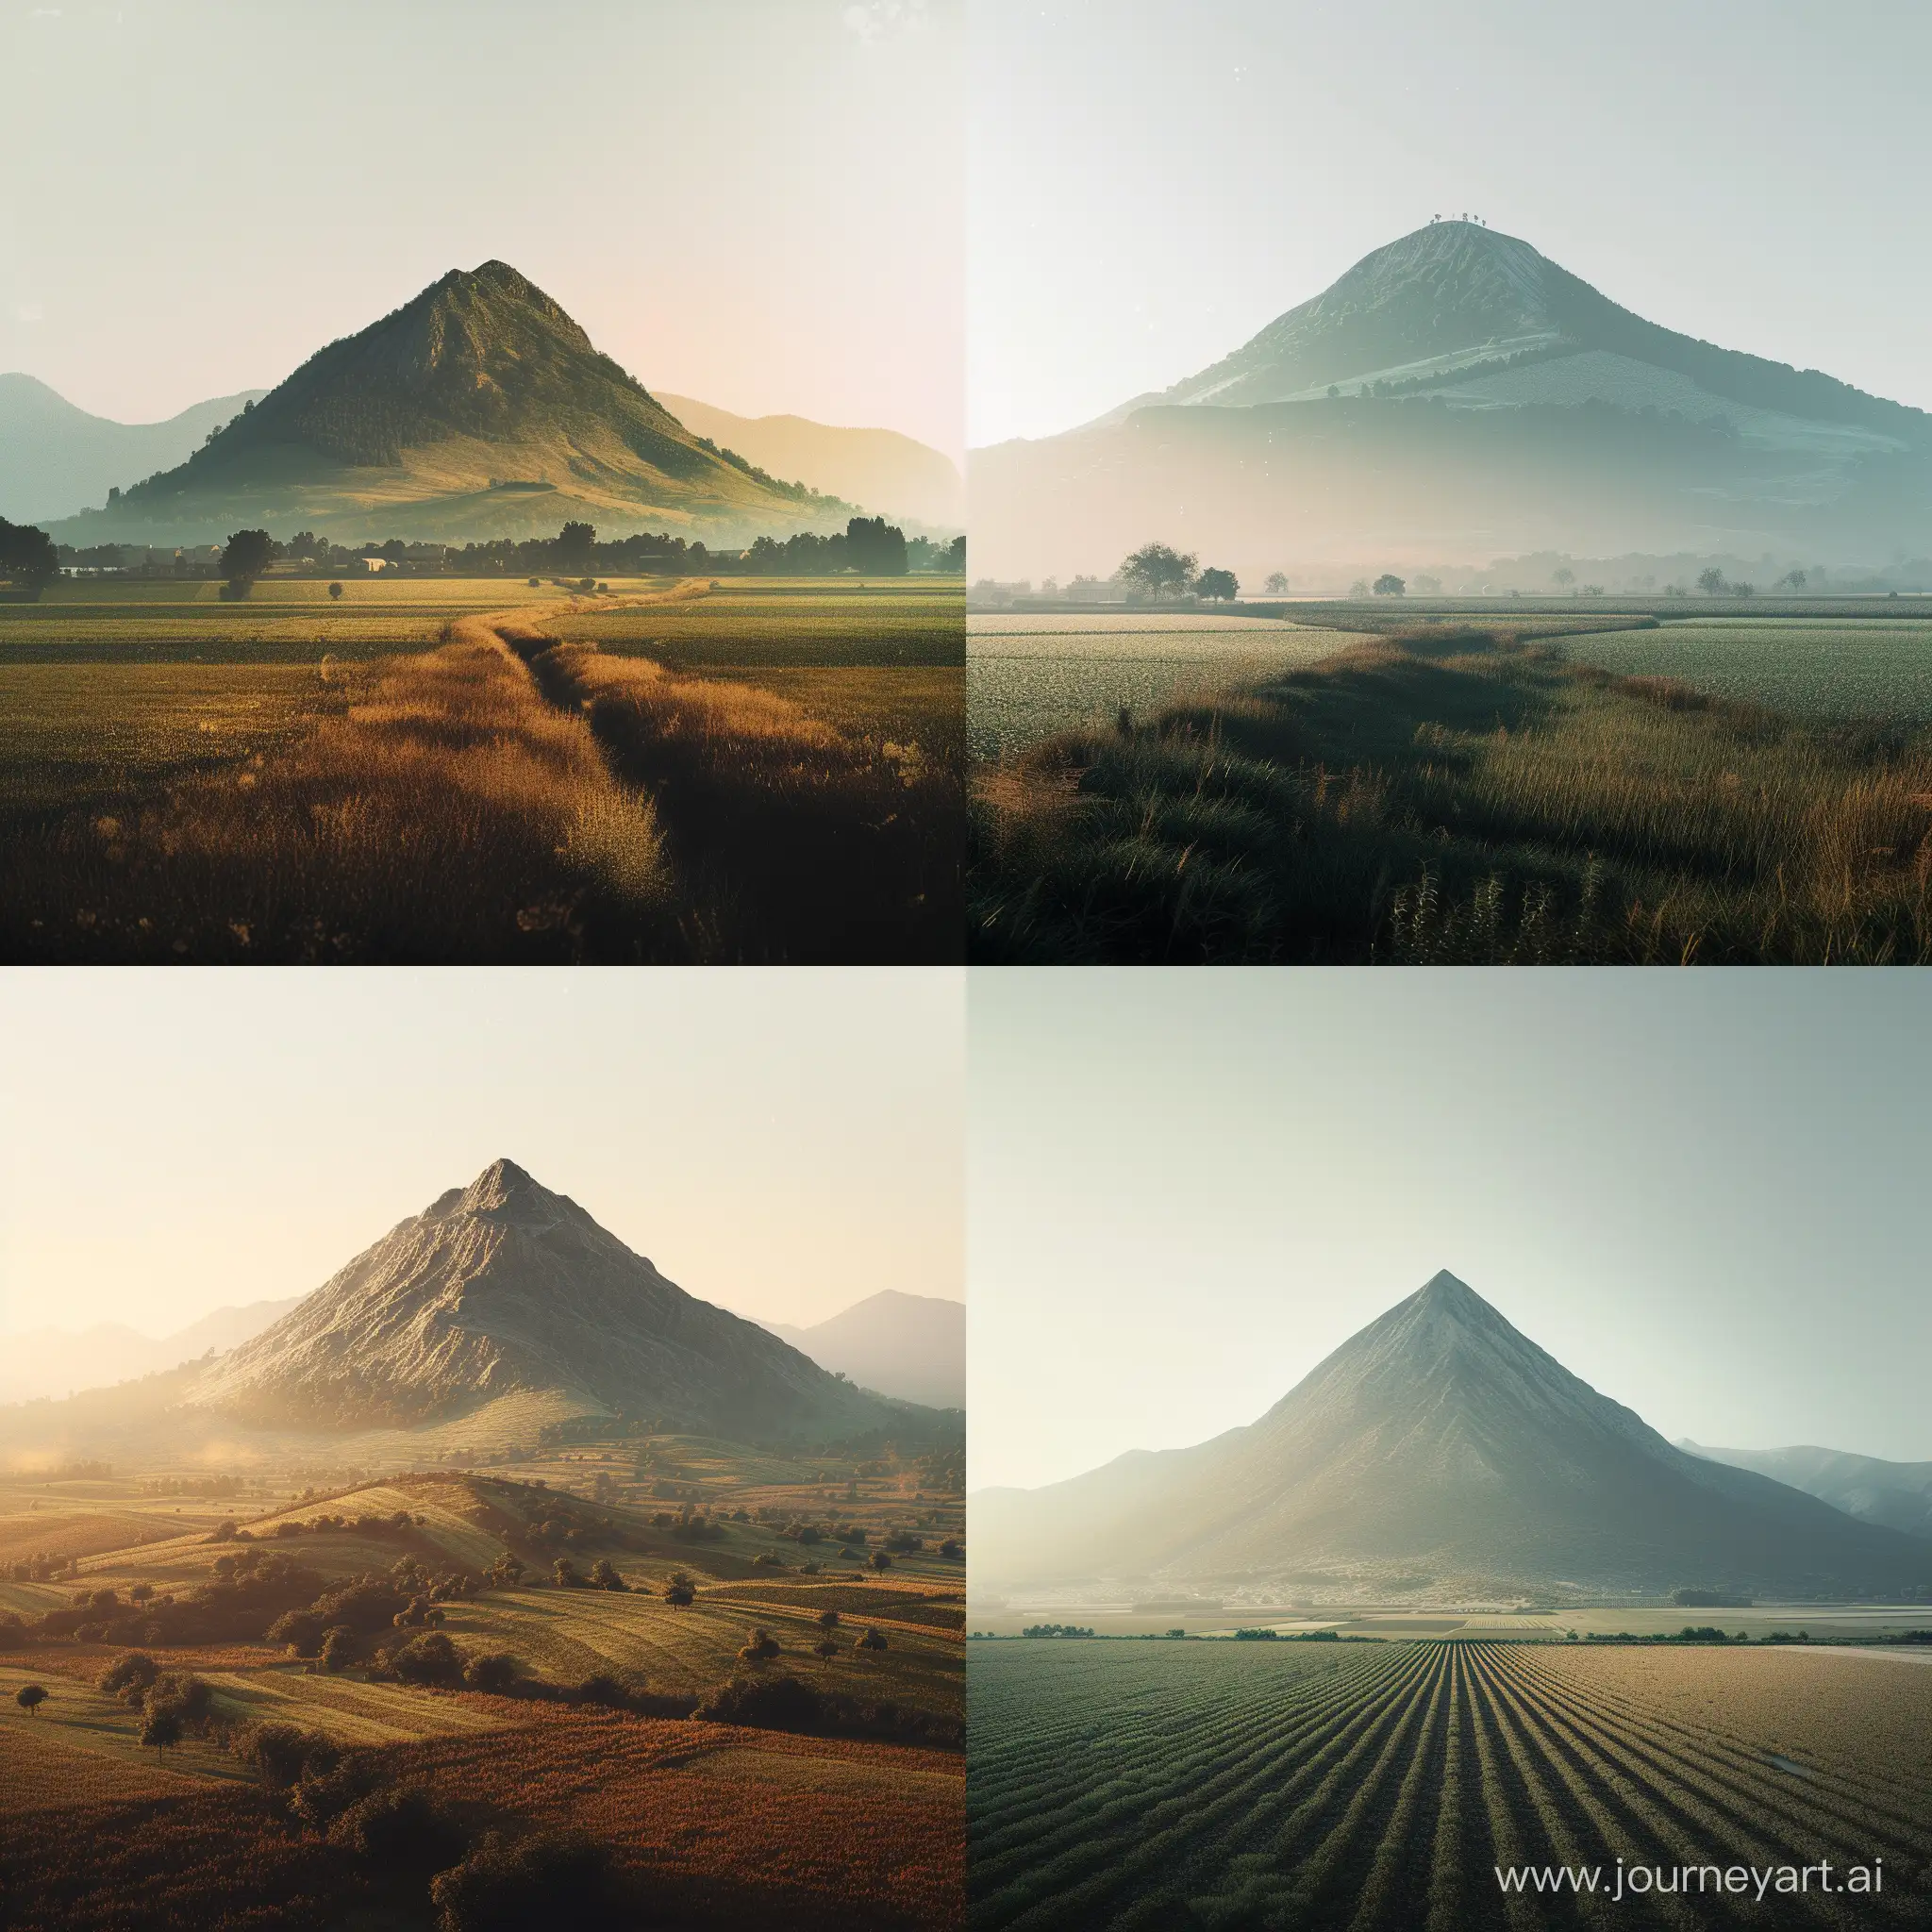 Serene-Farmland-Landscape-with-Majestic-Mountain-in-8K-UltraDetailed-Film-Photography